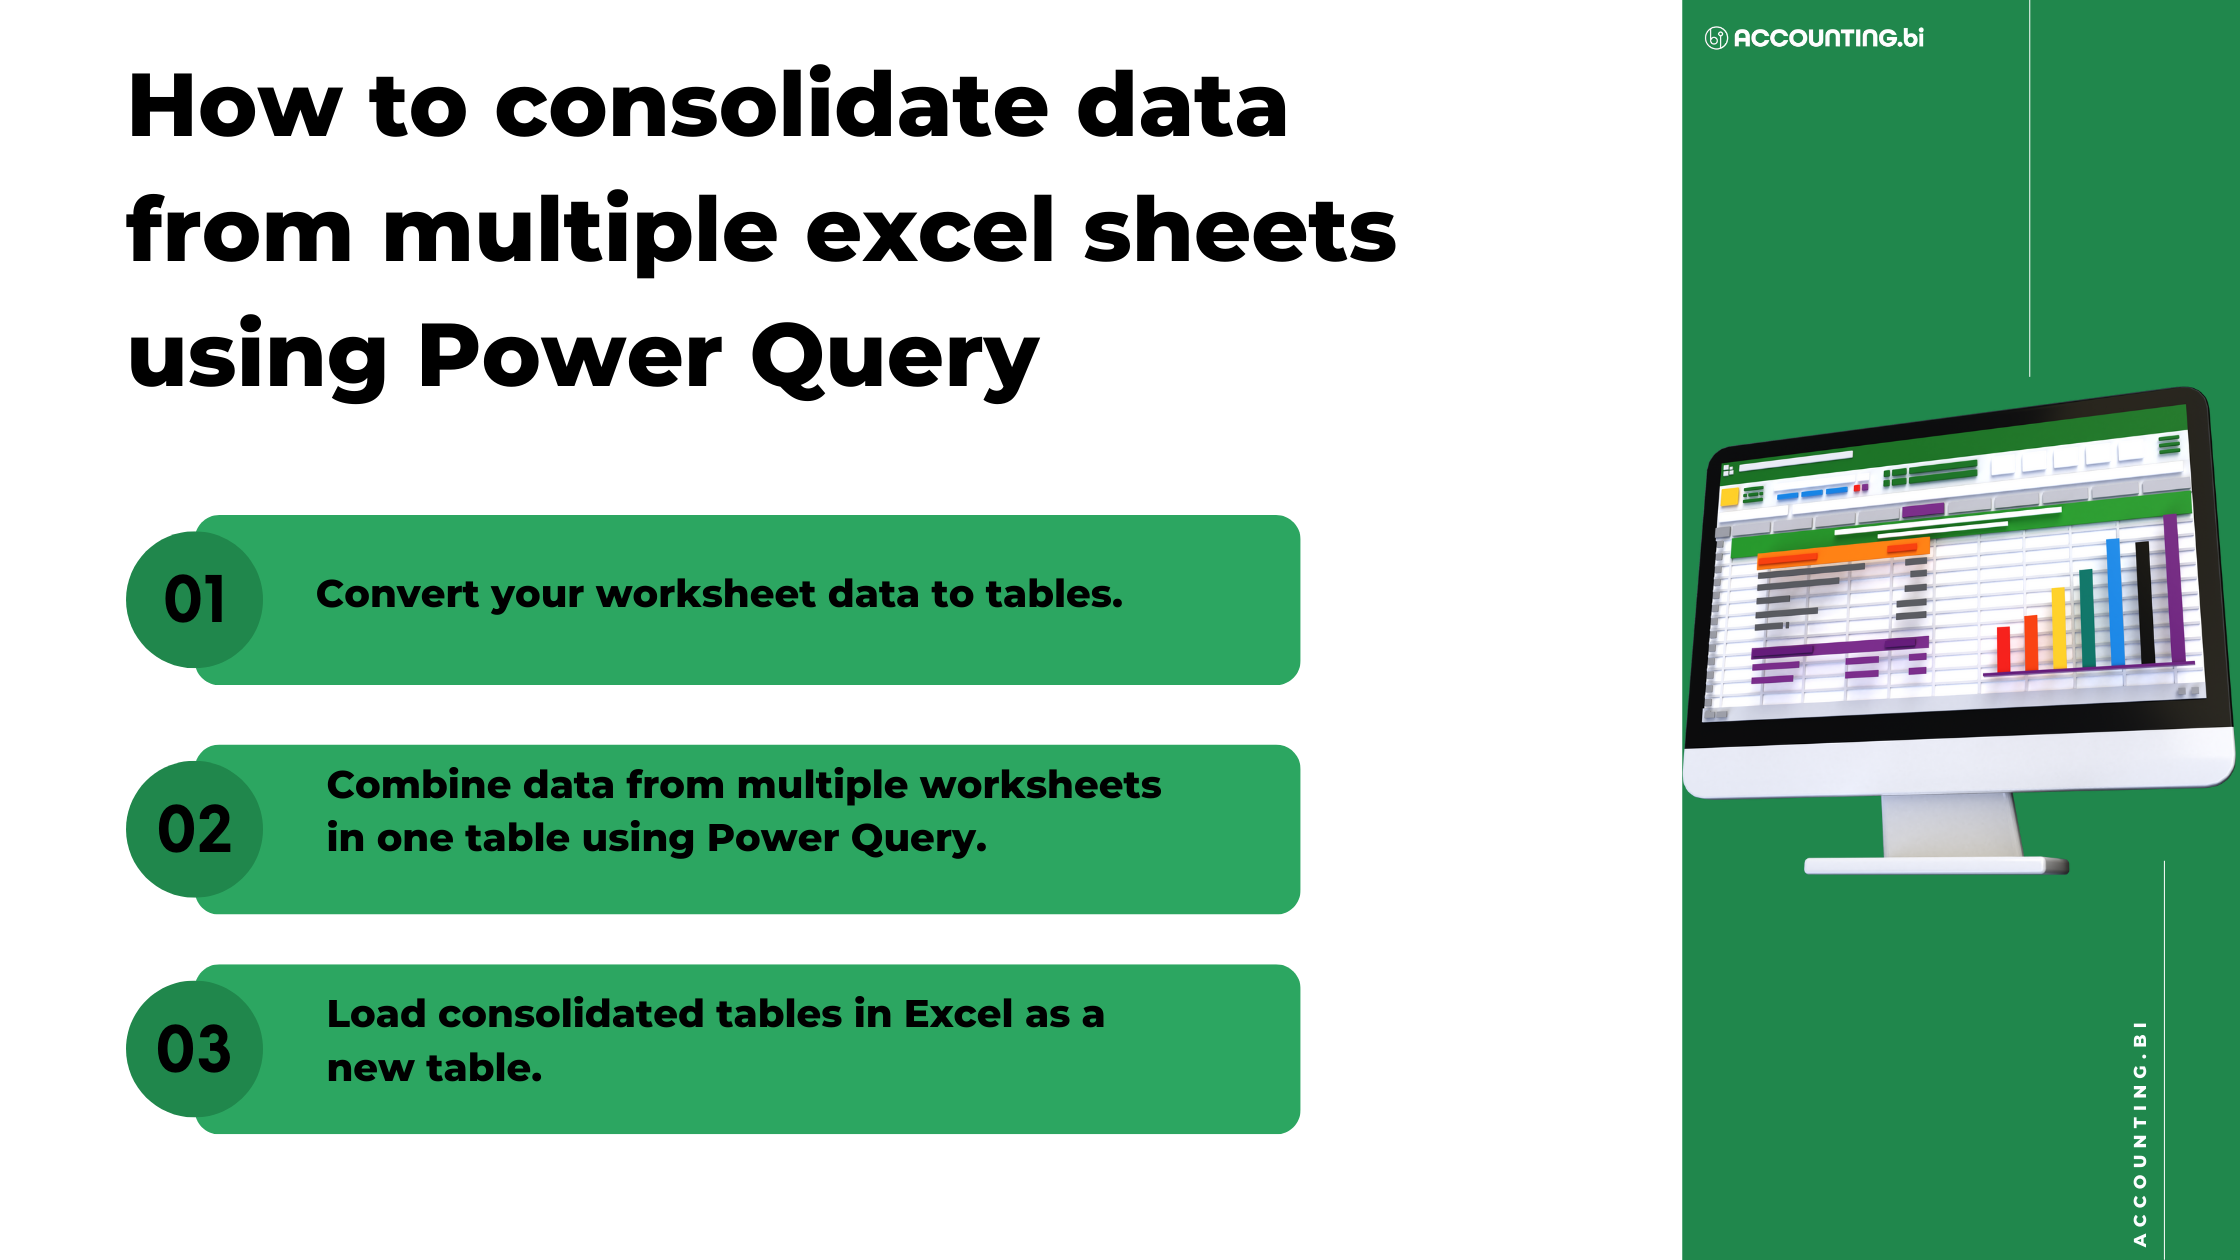 how-to-consolidate-data-from-multiple-excel-sheets-using-power-query-business-intelligence-by